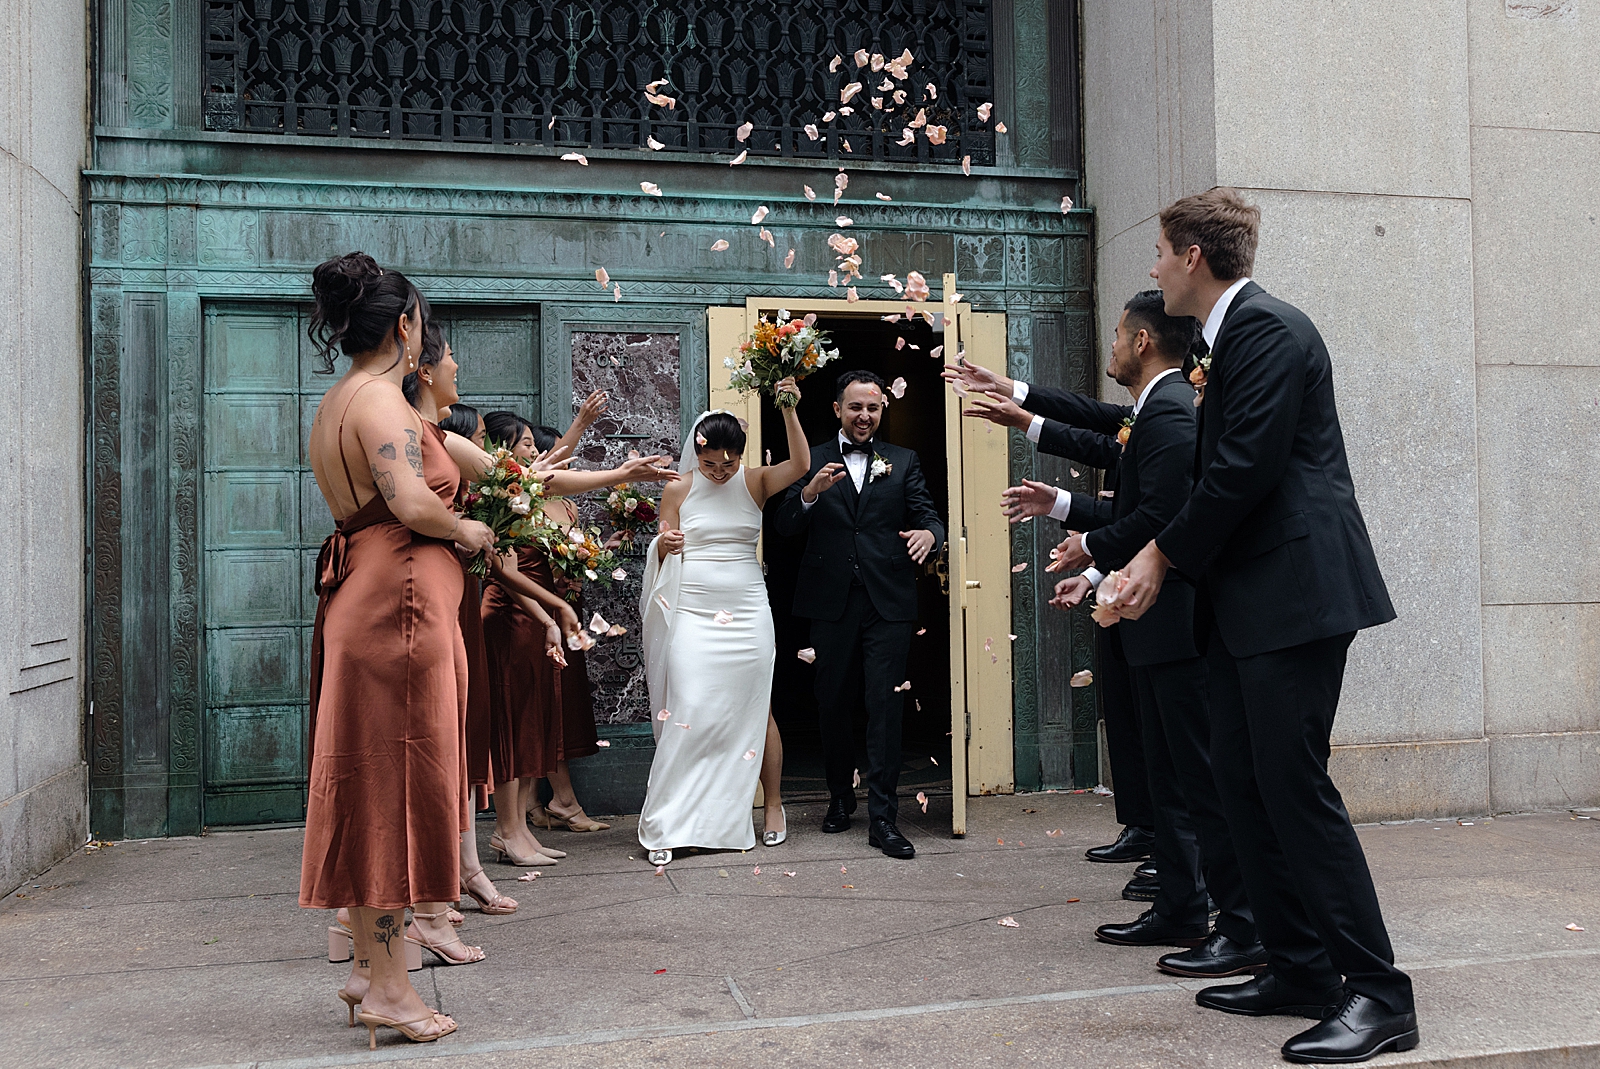 Full shot of the bride and groom exiting the courthouse as their bridal party showers them in flower petals. 